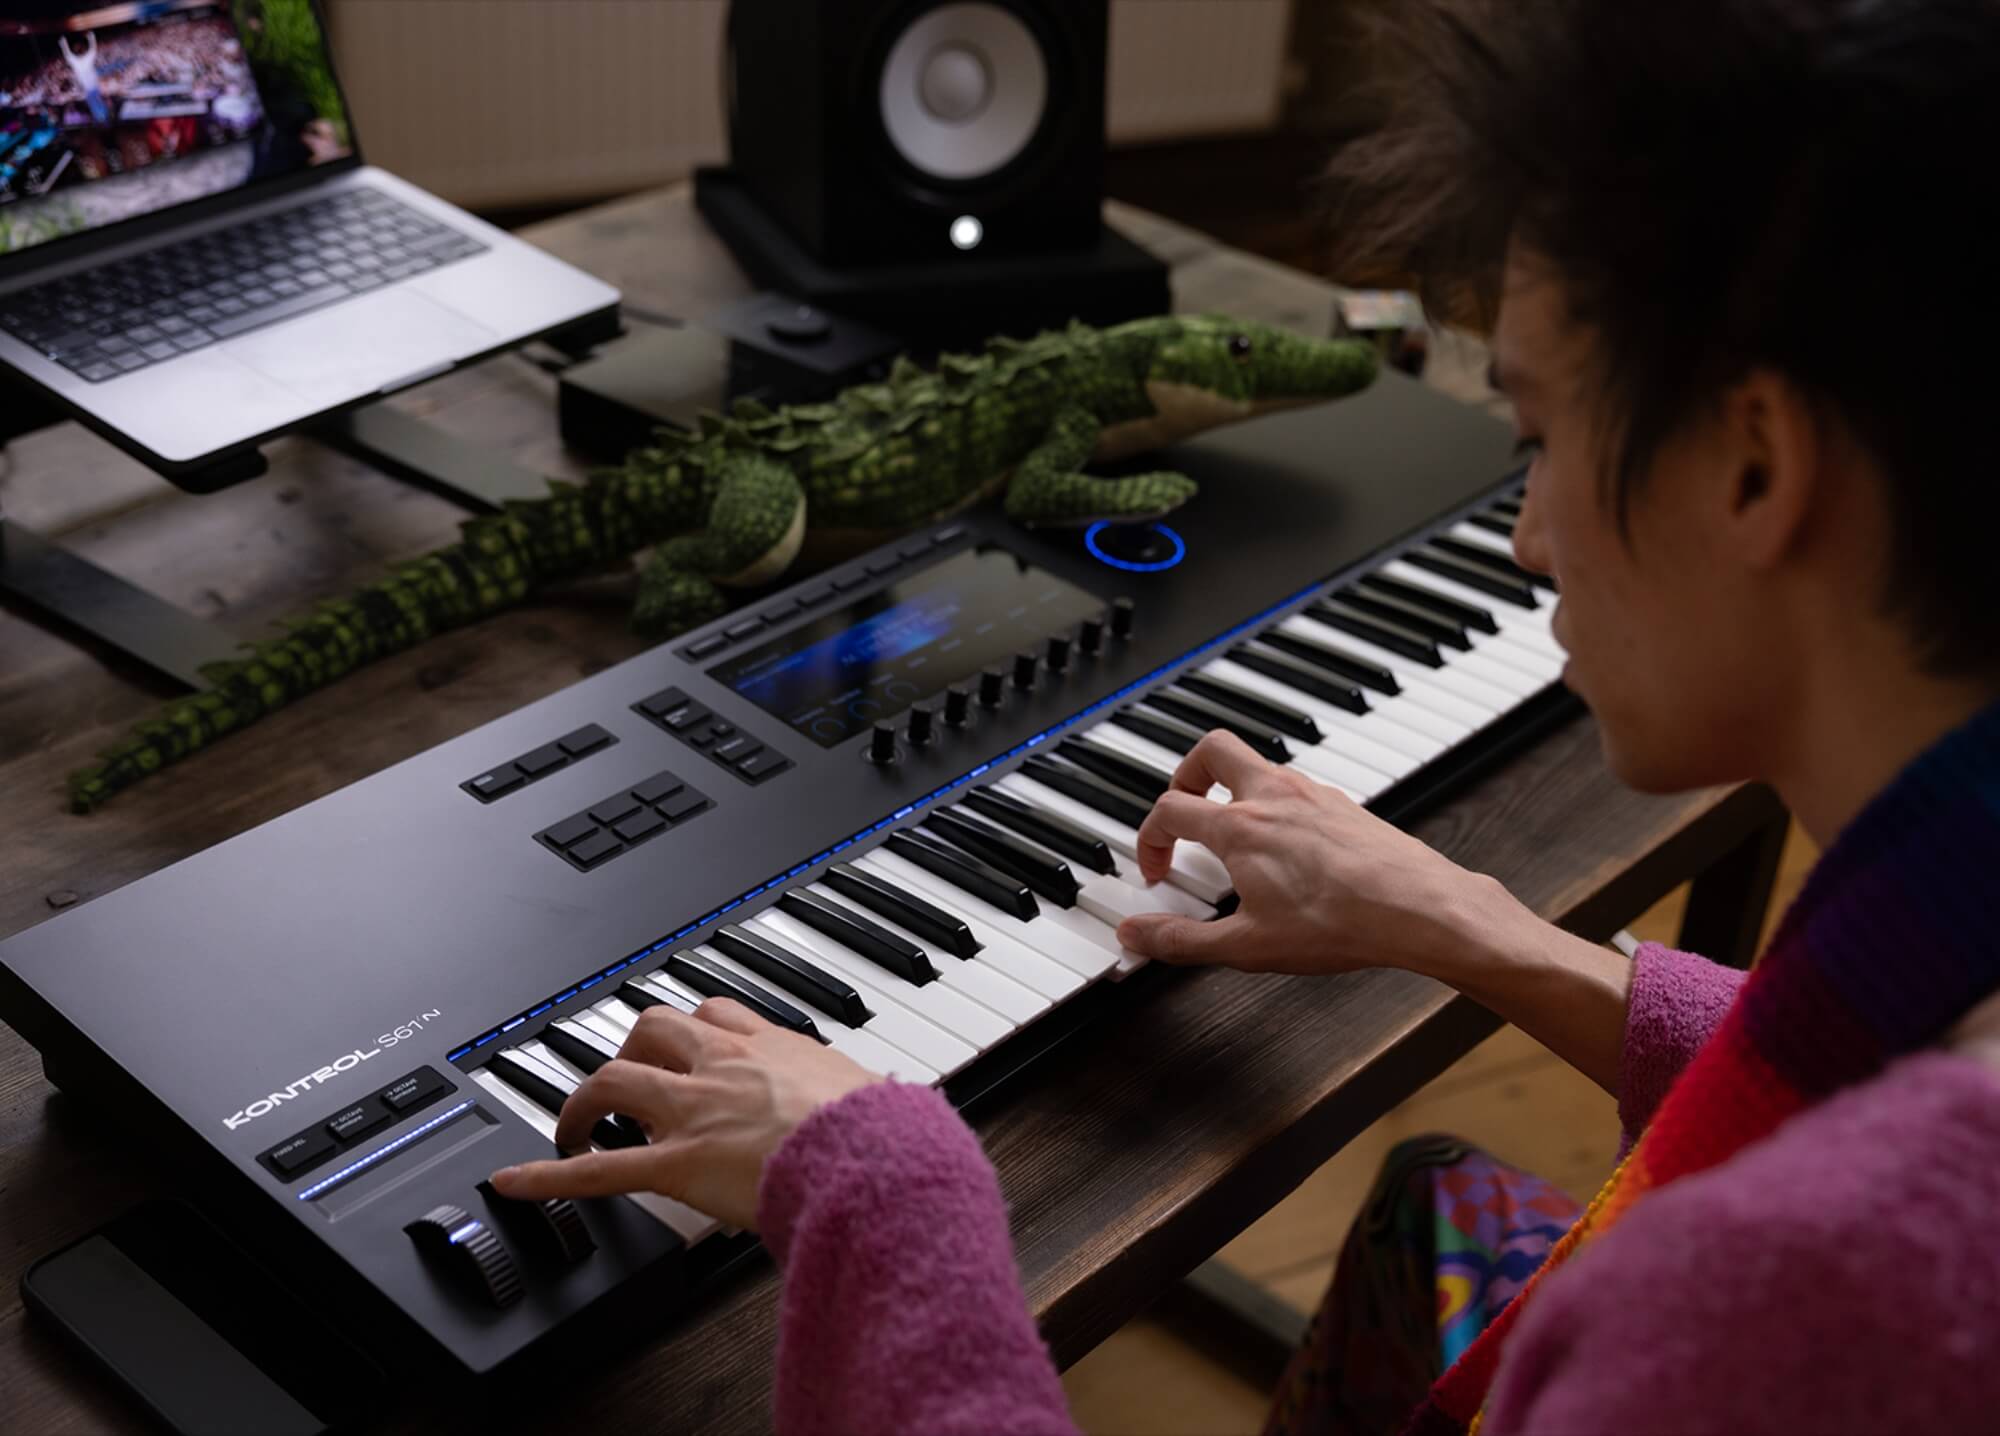 Jacob Collier playing a keyboard